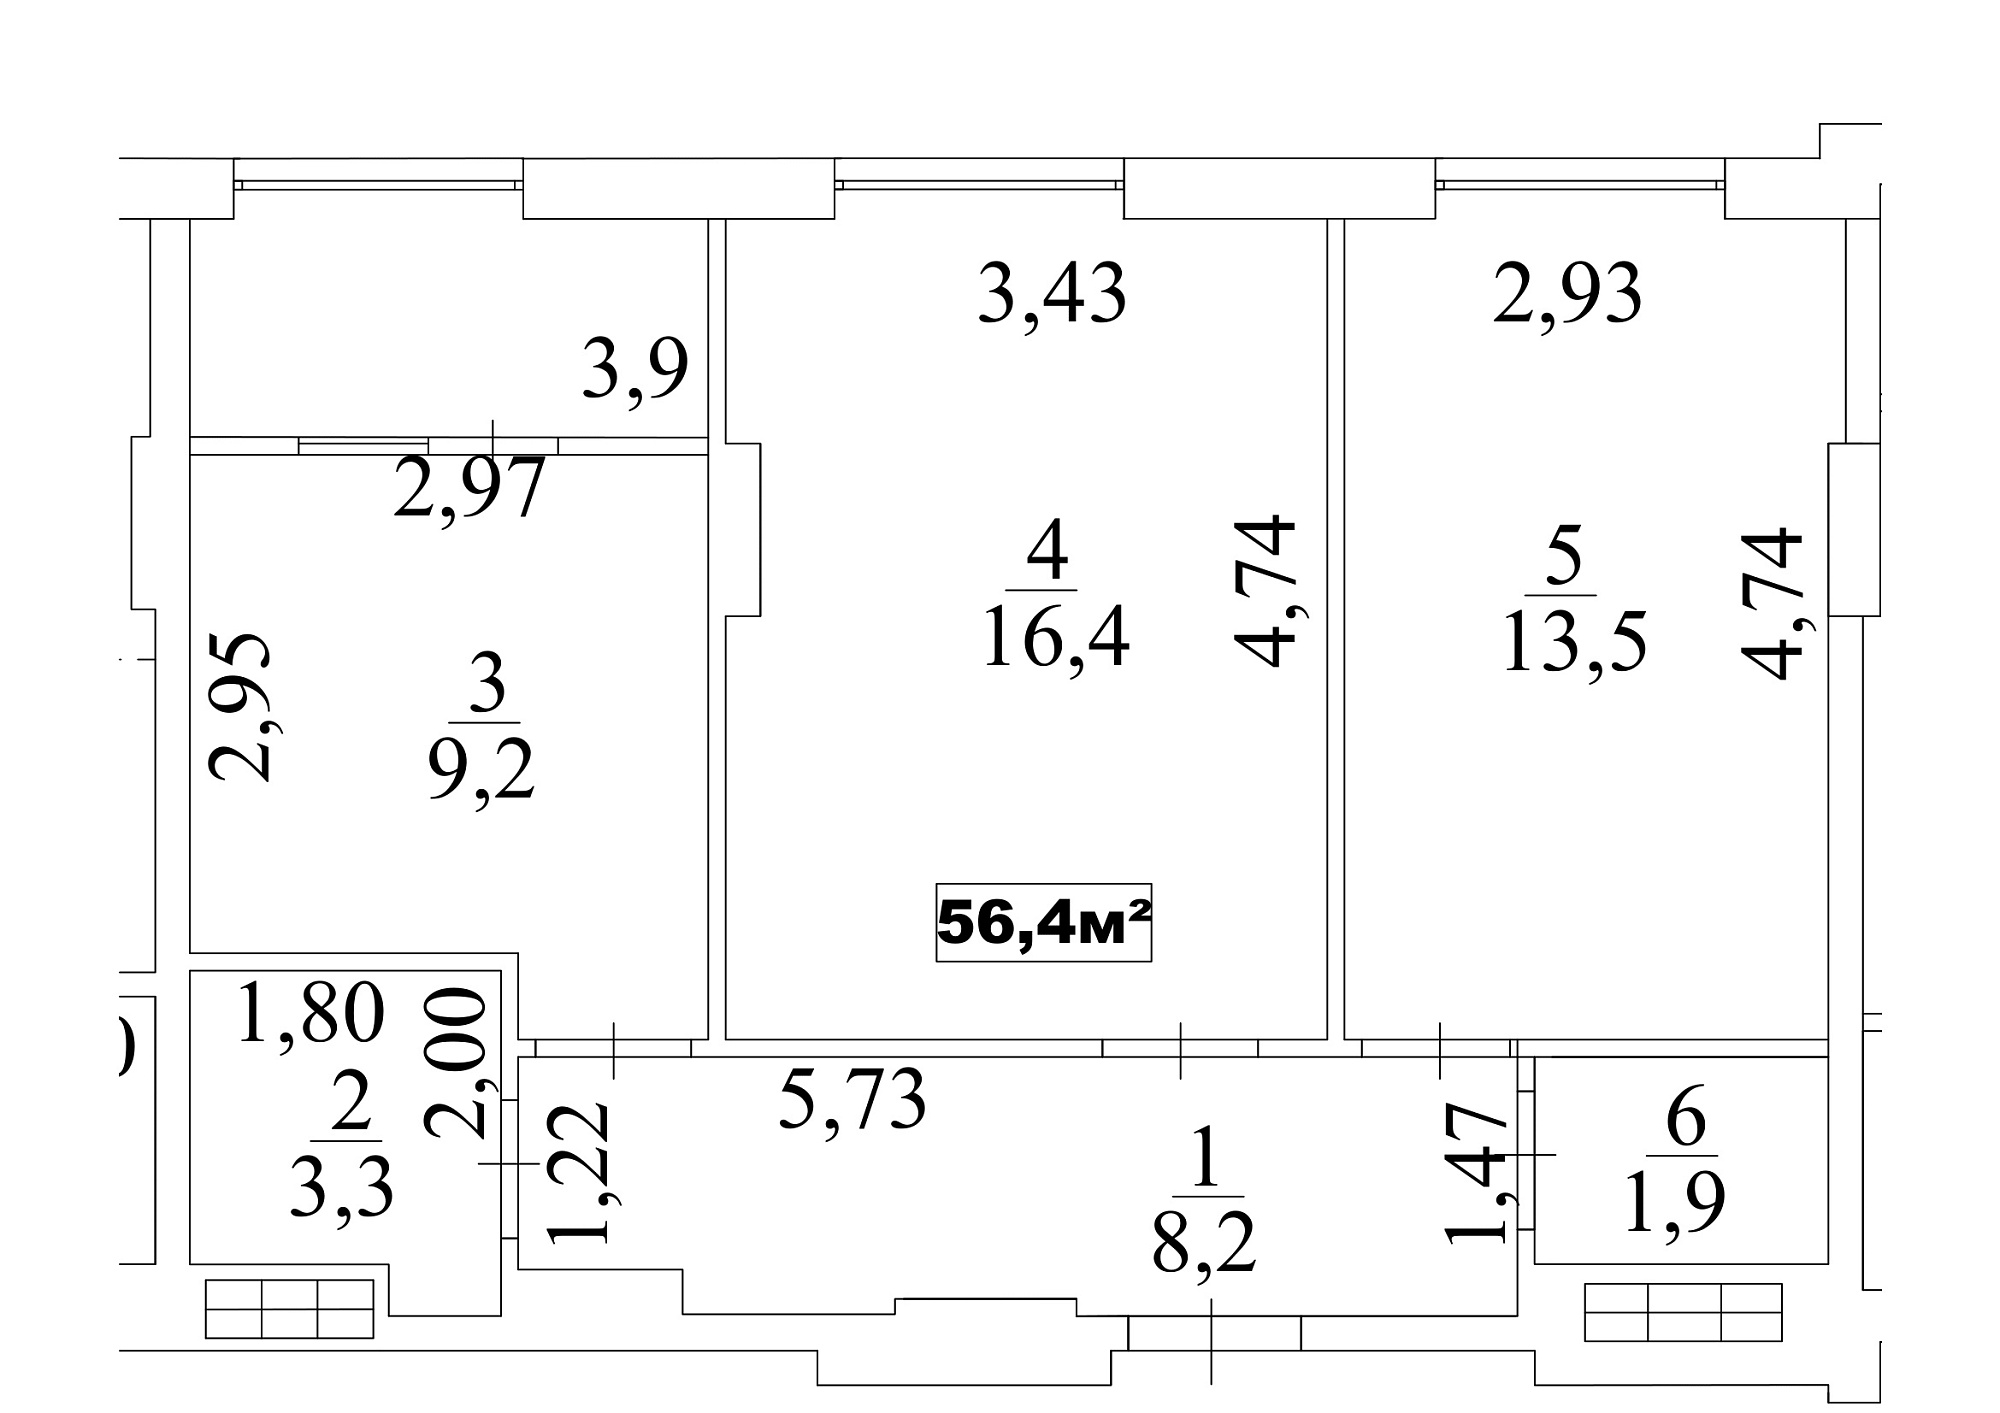 Planning 2-rm flats area 56.4m2, AB-10-06/00049.